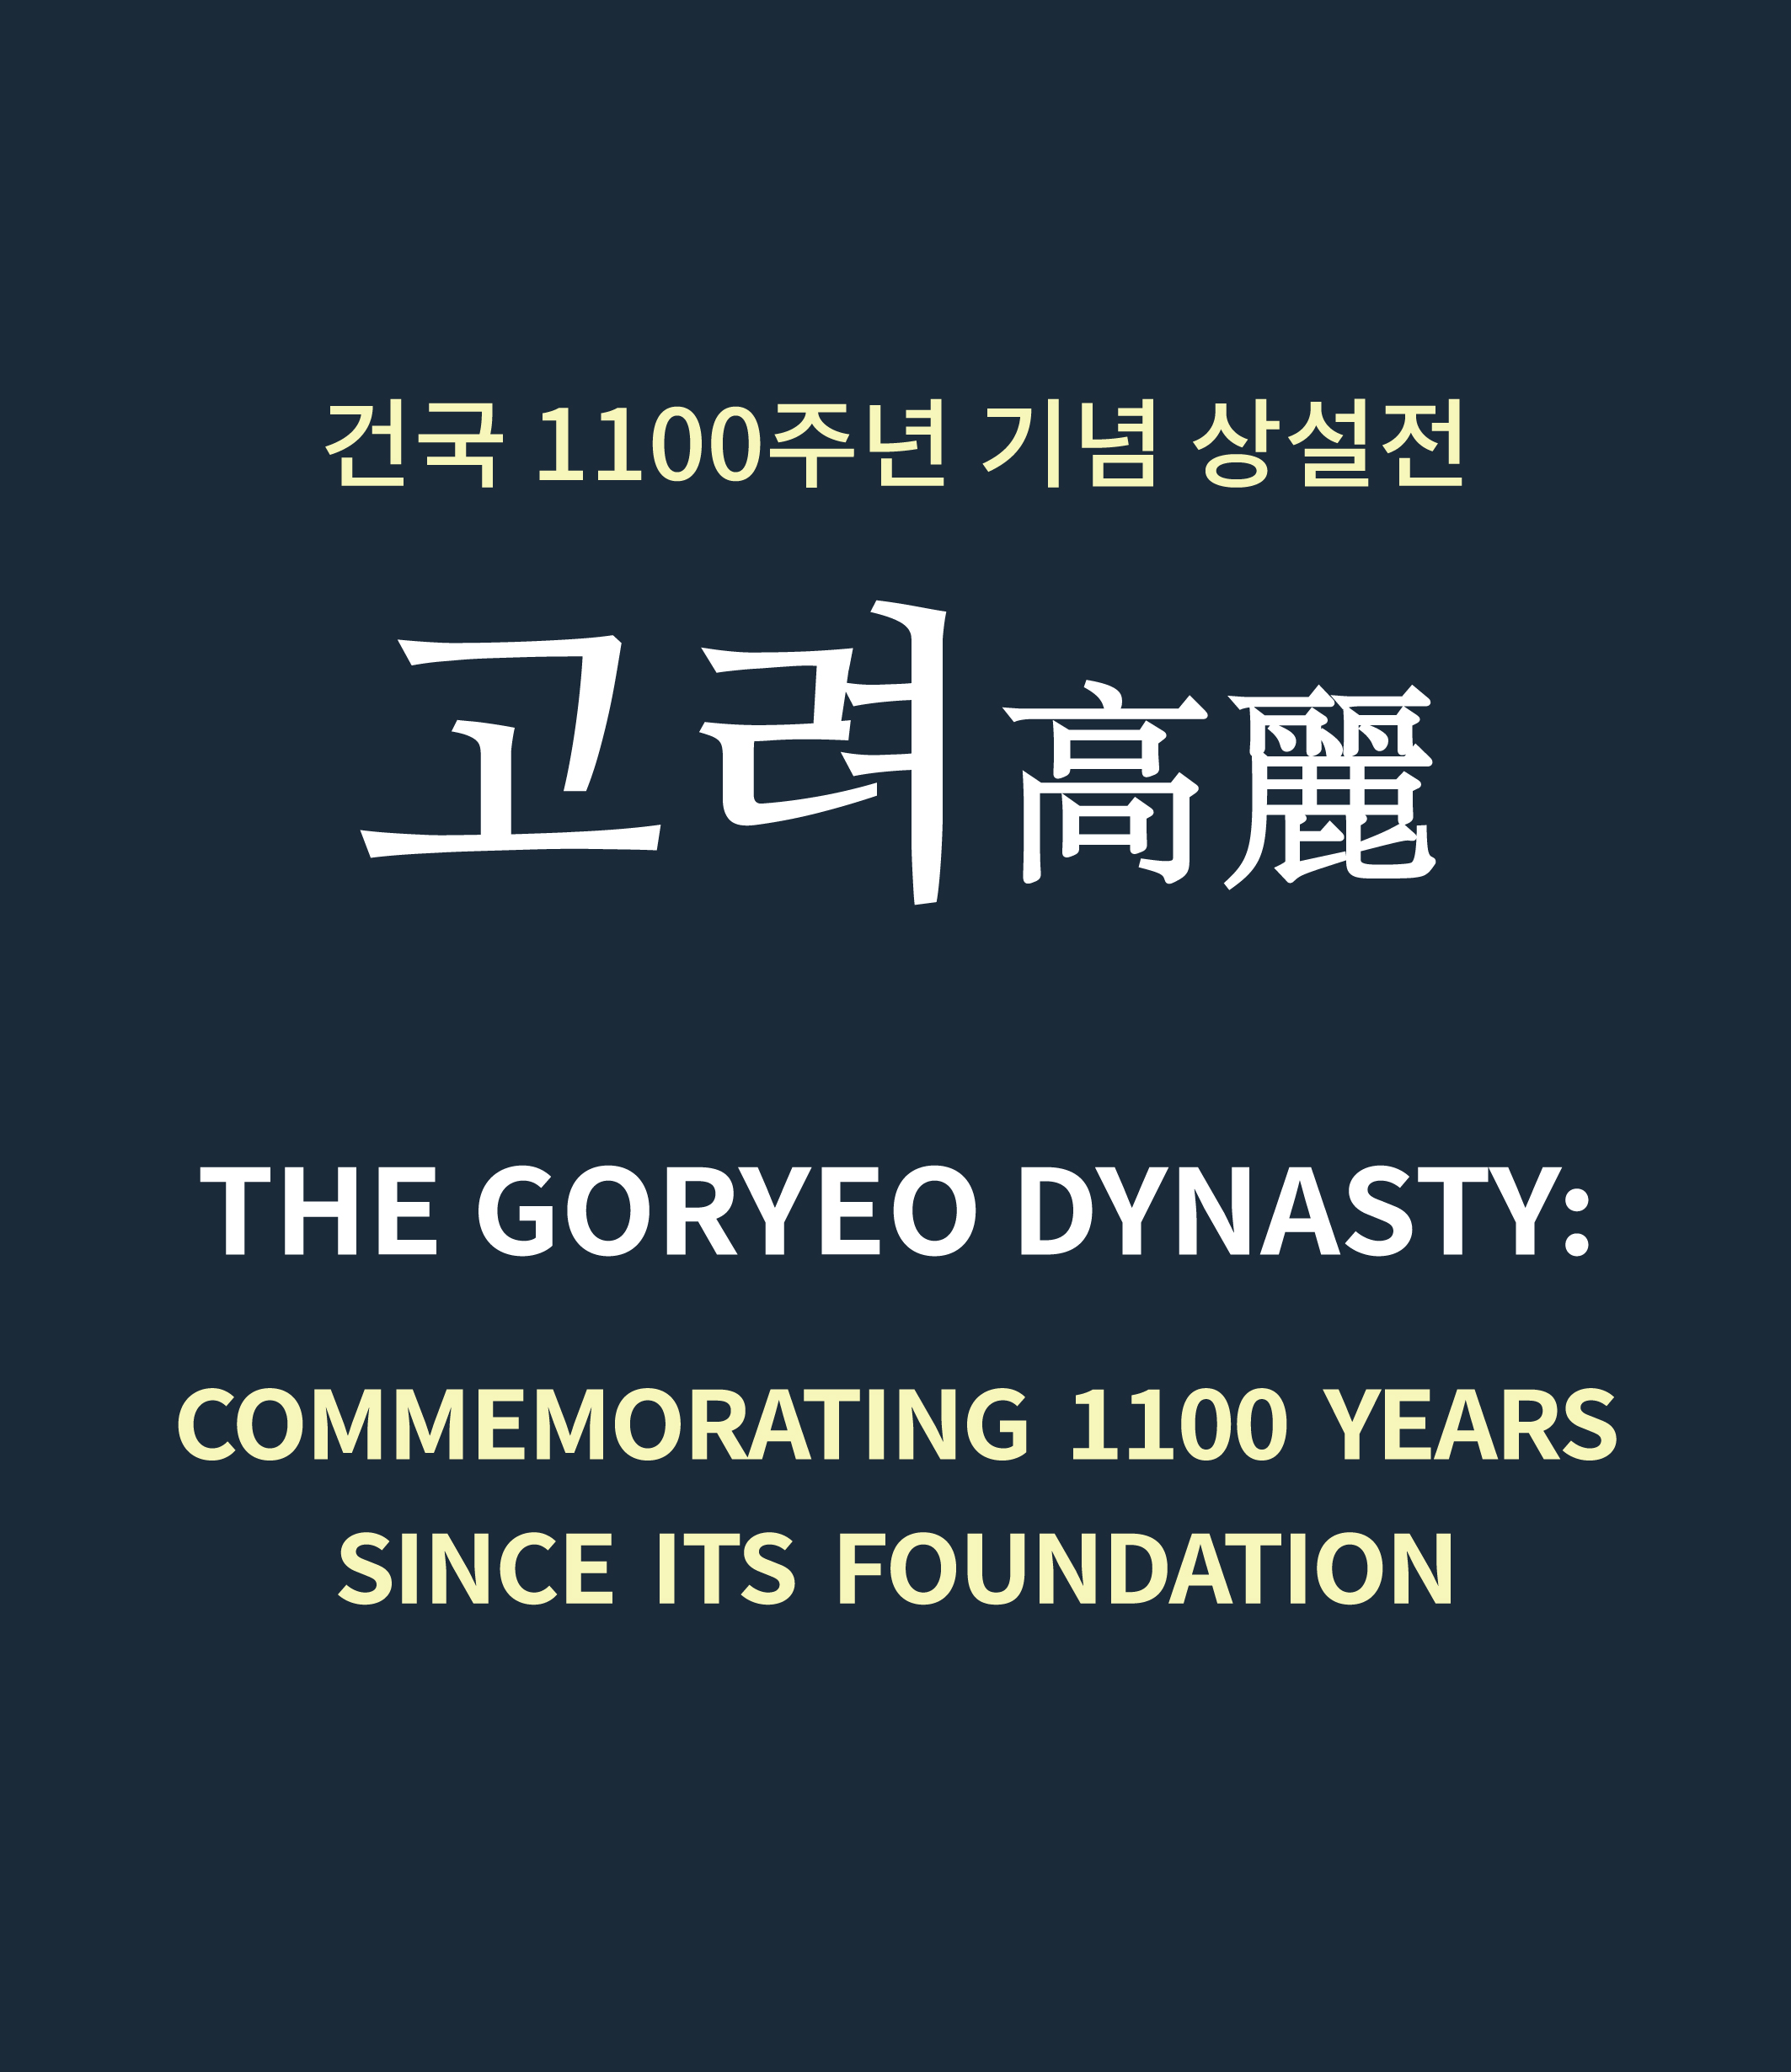 The Goryeo Dynasty: Commemorating 1100 Years Since Its Foundation